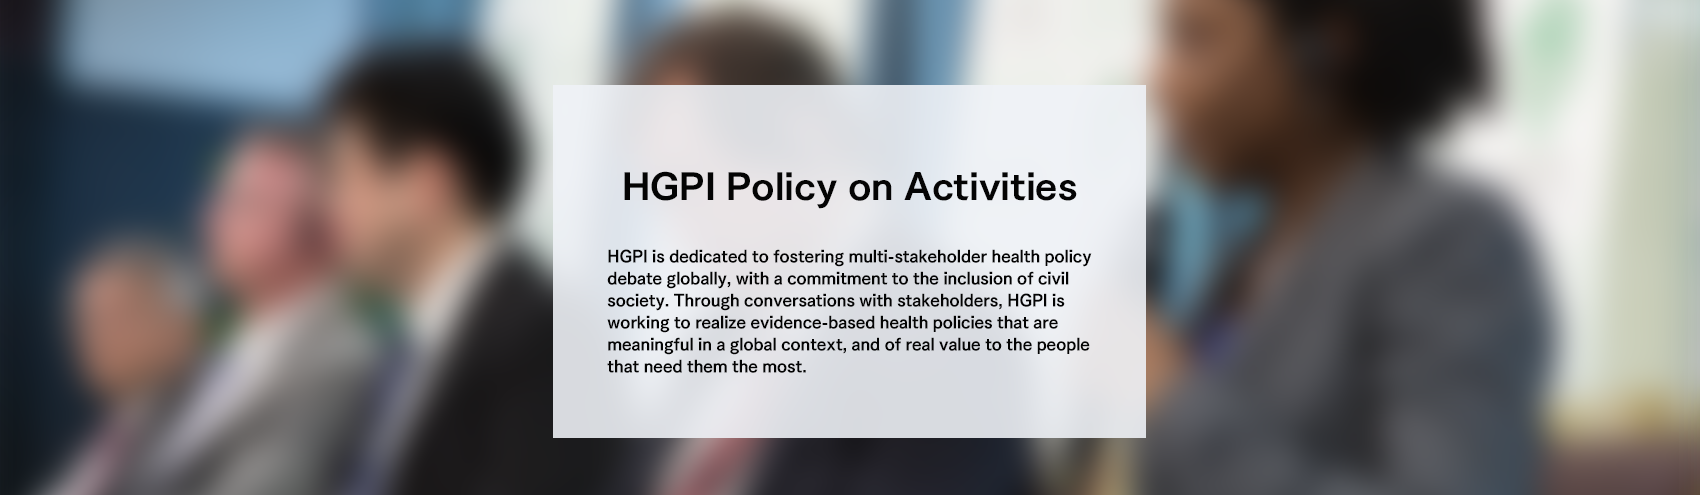 HGPI Policy on FY2021 Activities